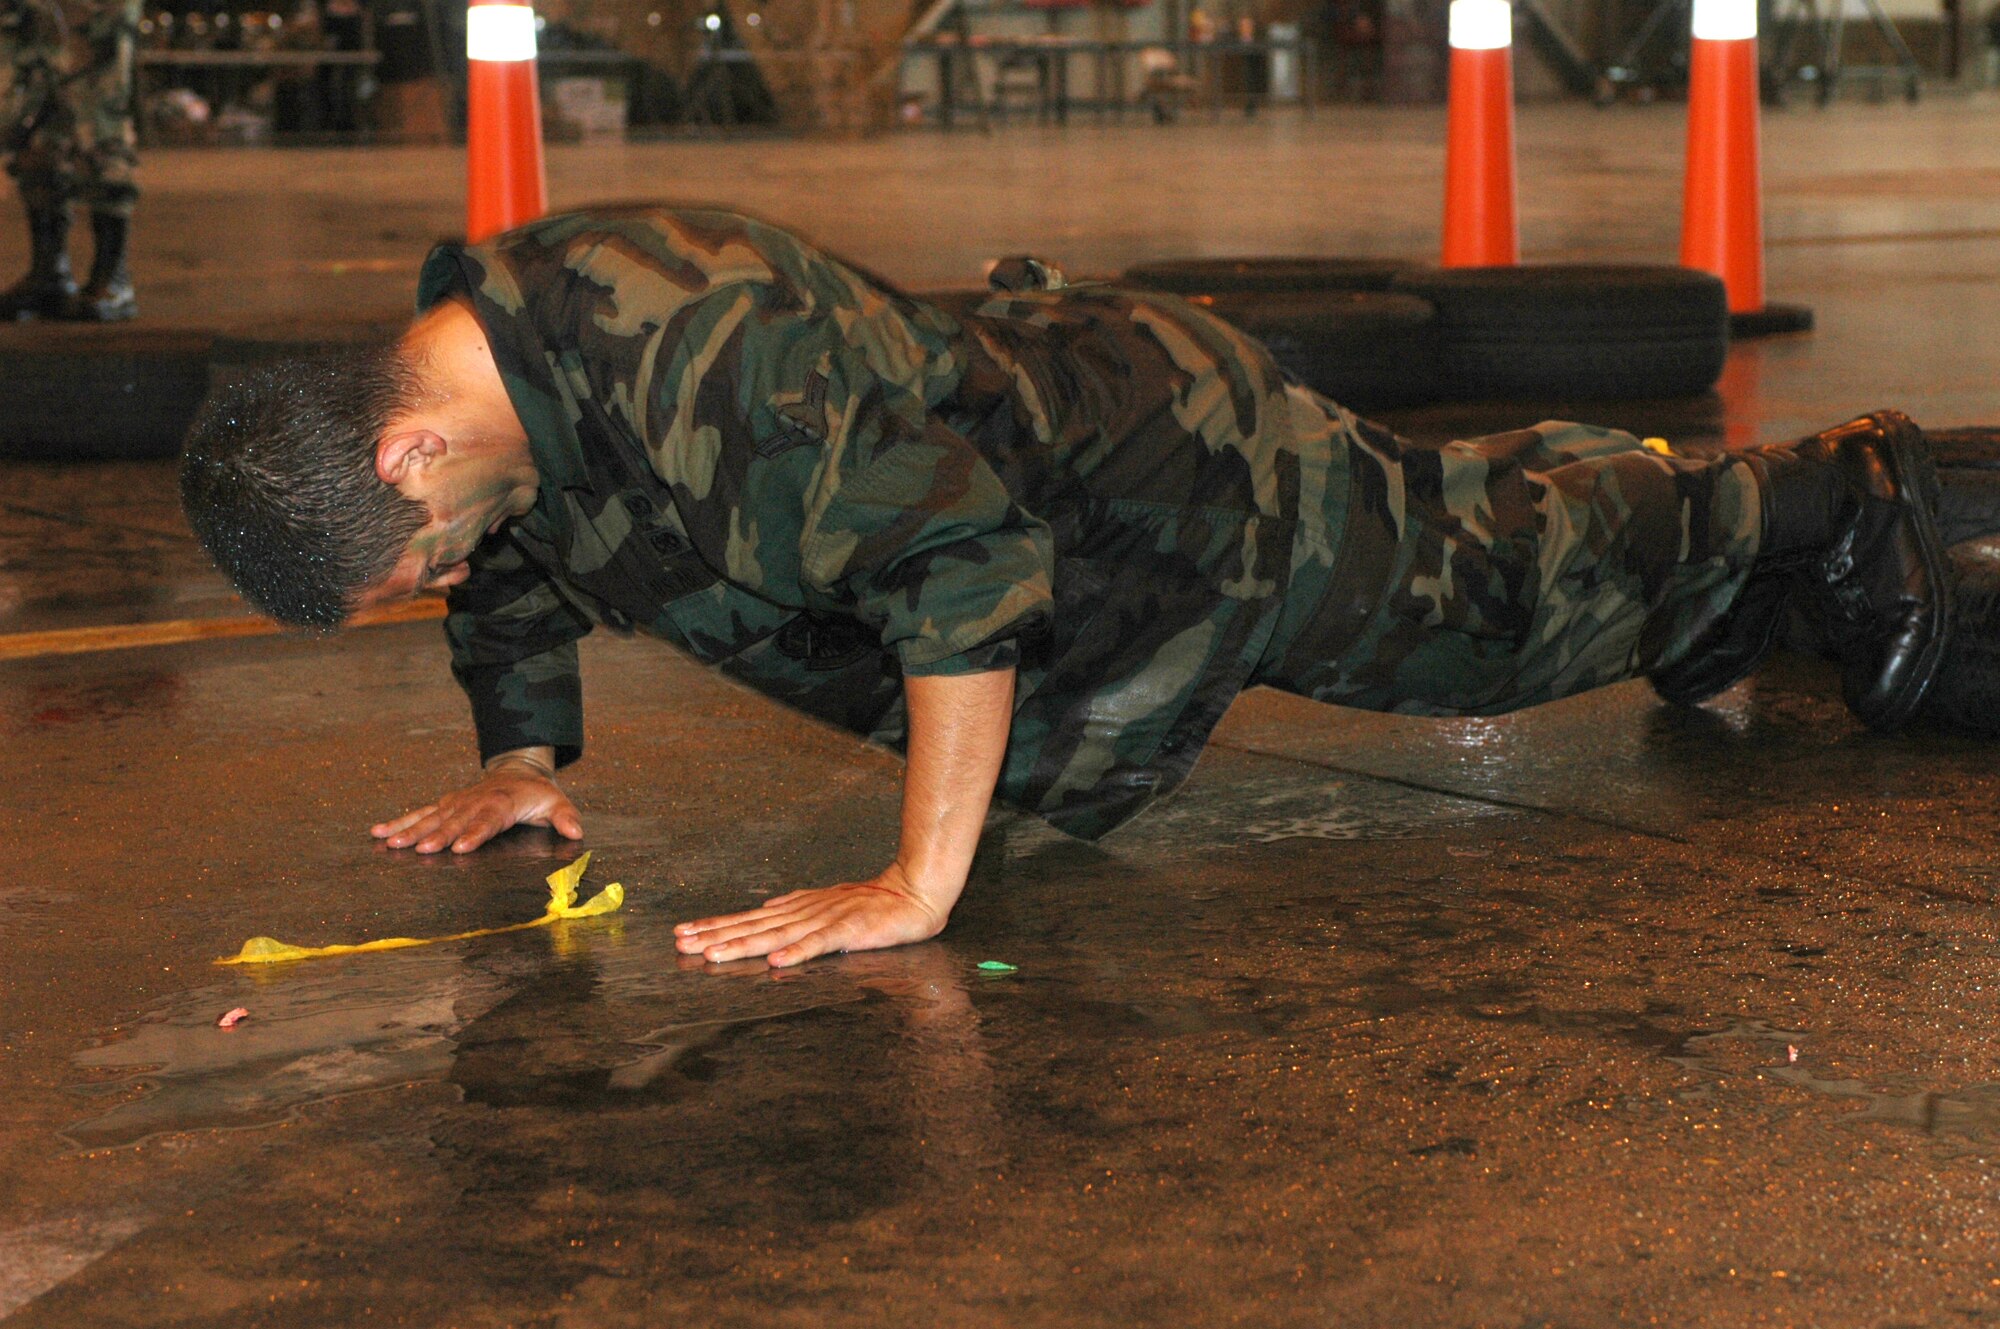 After shuffling his way through a tire obstacle, a member of Team Travis has to complete 10 pushups before moving on in the obstacle course. Dining-in participants who broke the rules of engagement were forced to finish the course while being attacked by the rest of the mess armed with water guns and balloons. (U.S. Air Force photo/Senior Airman Shaun Emery)